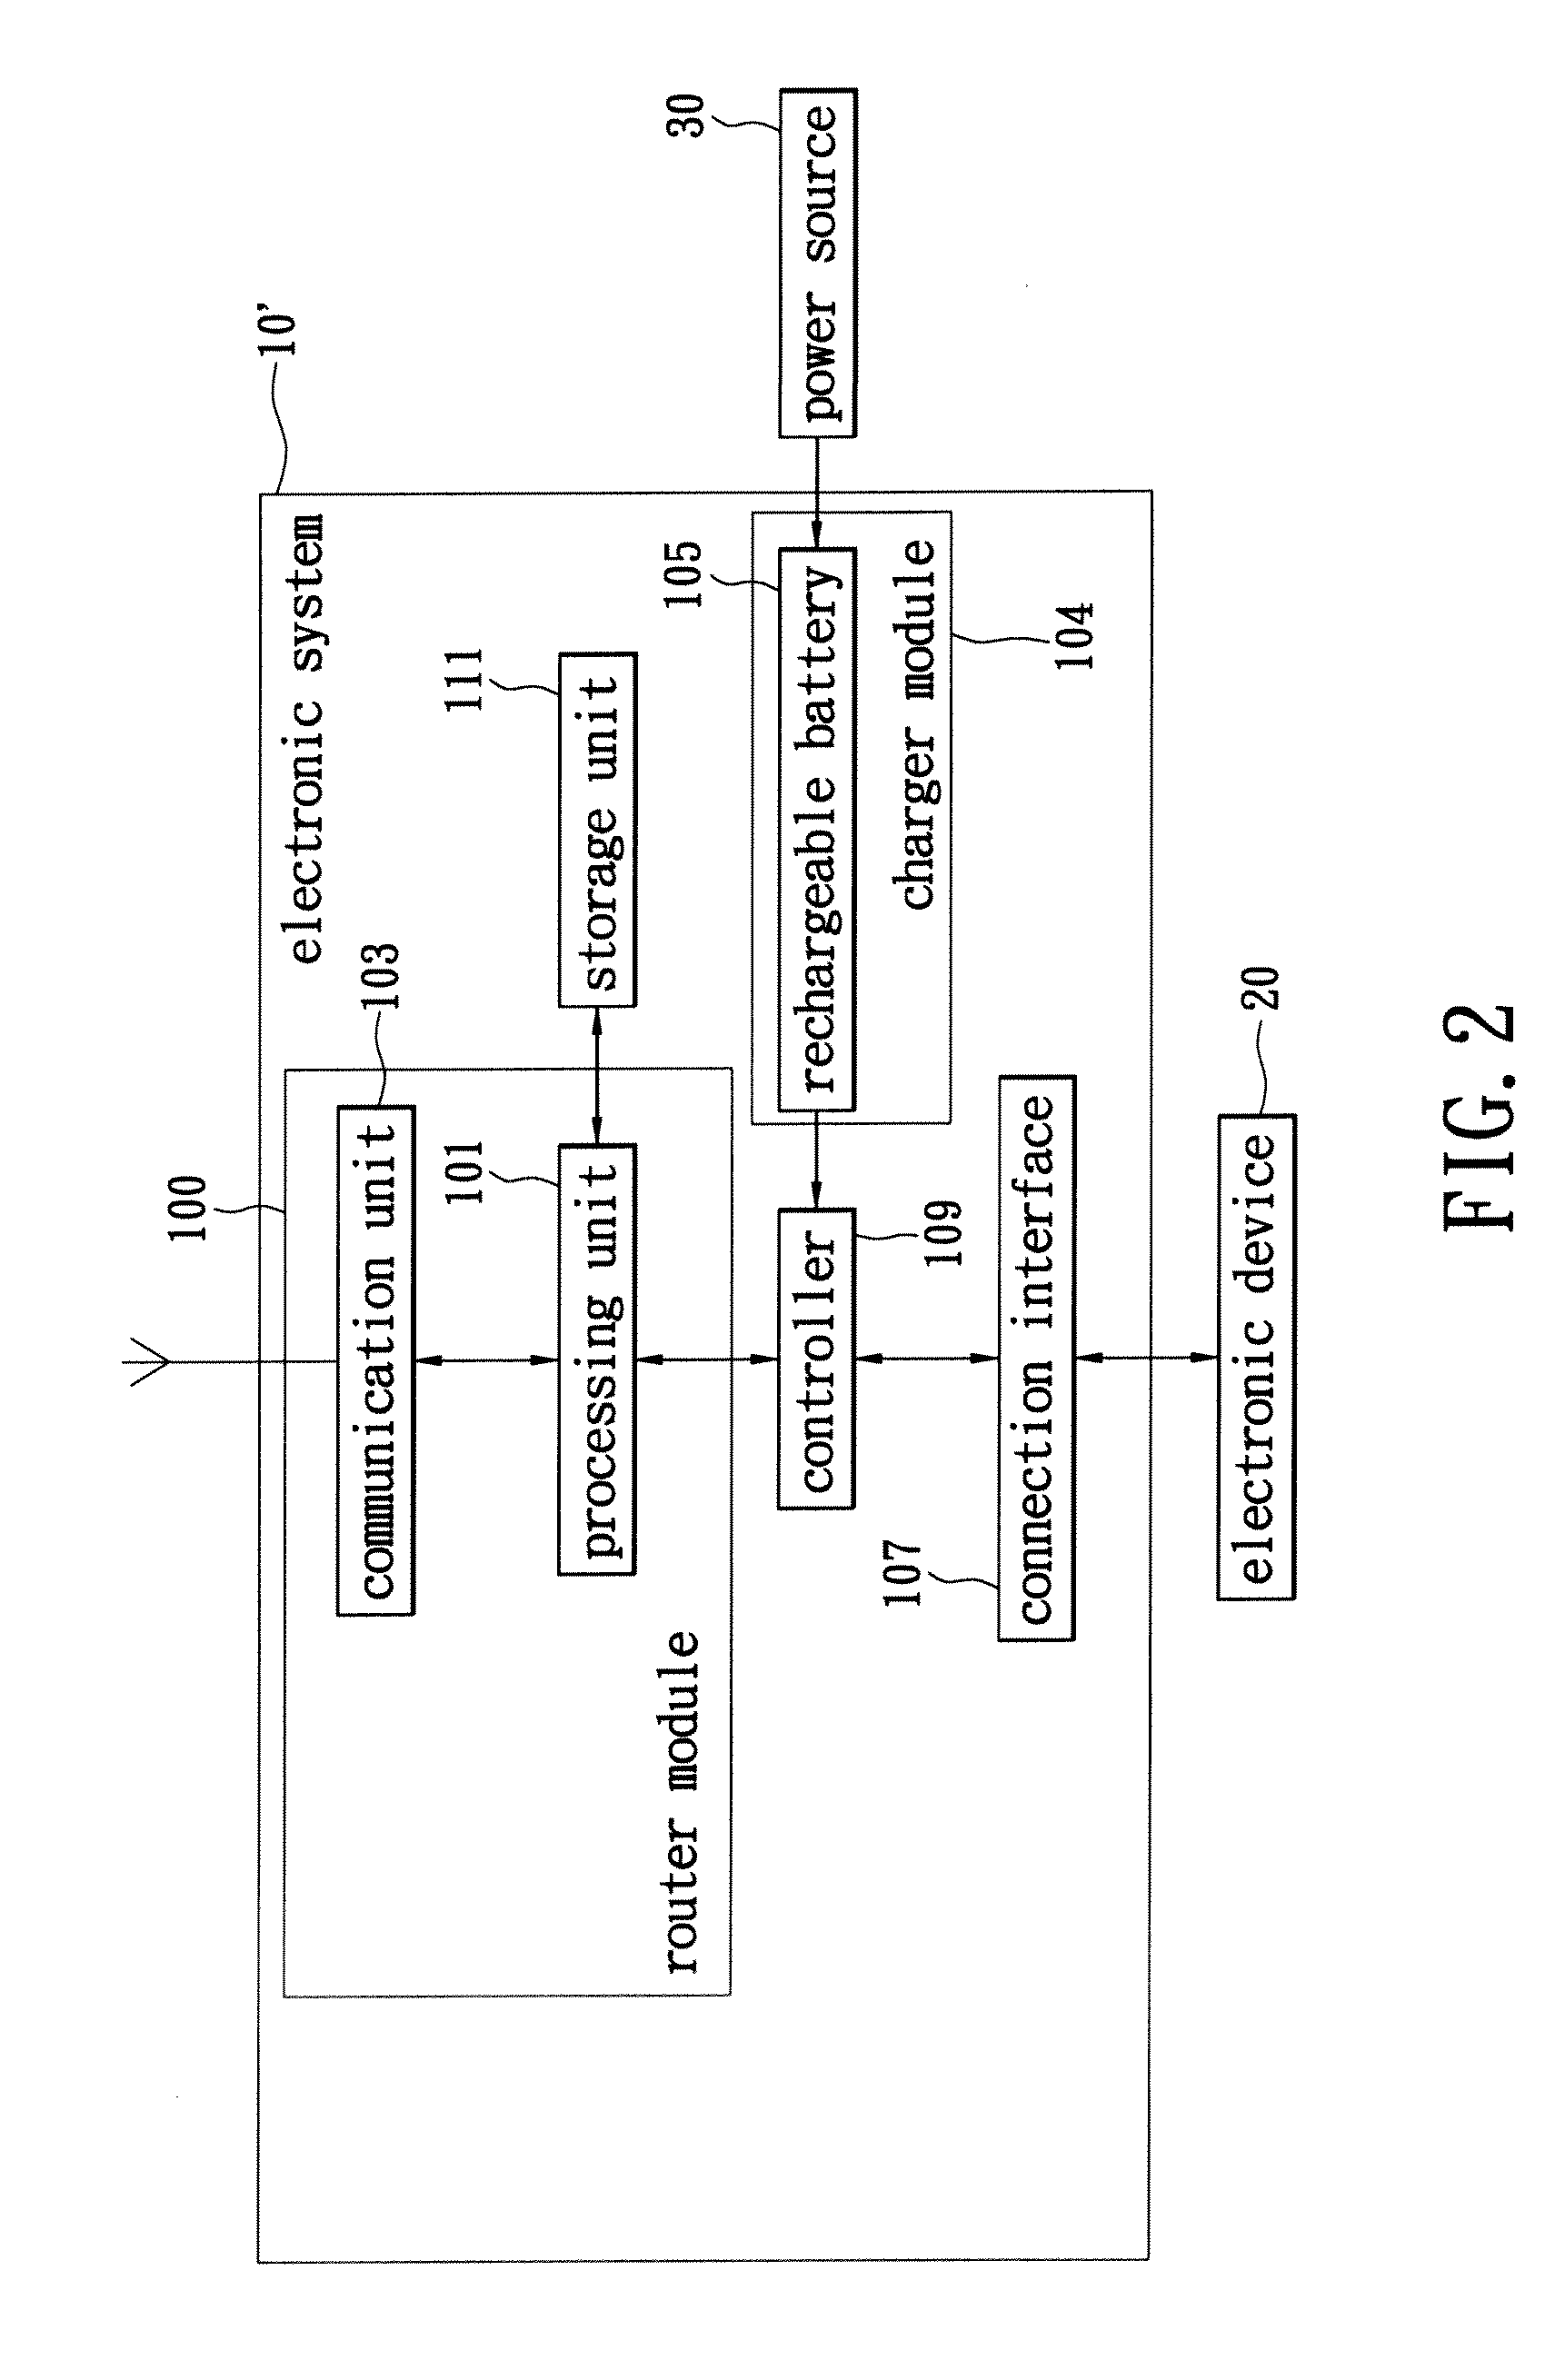 Electronic system with router and charger functions, and method for operating the same